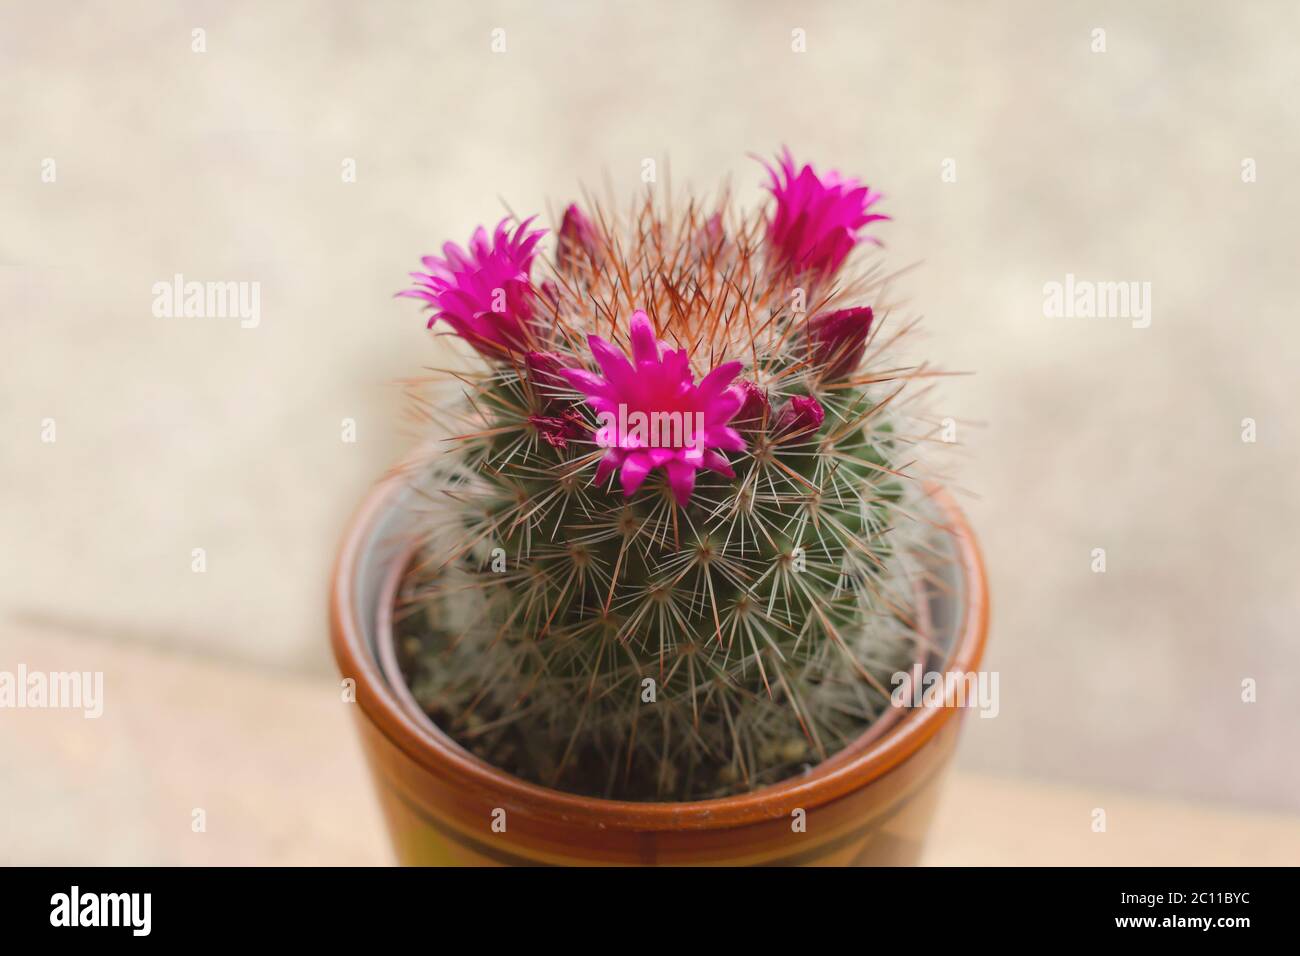 Mammillaria spinosissima cactus with blooming flowers Stock Photo